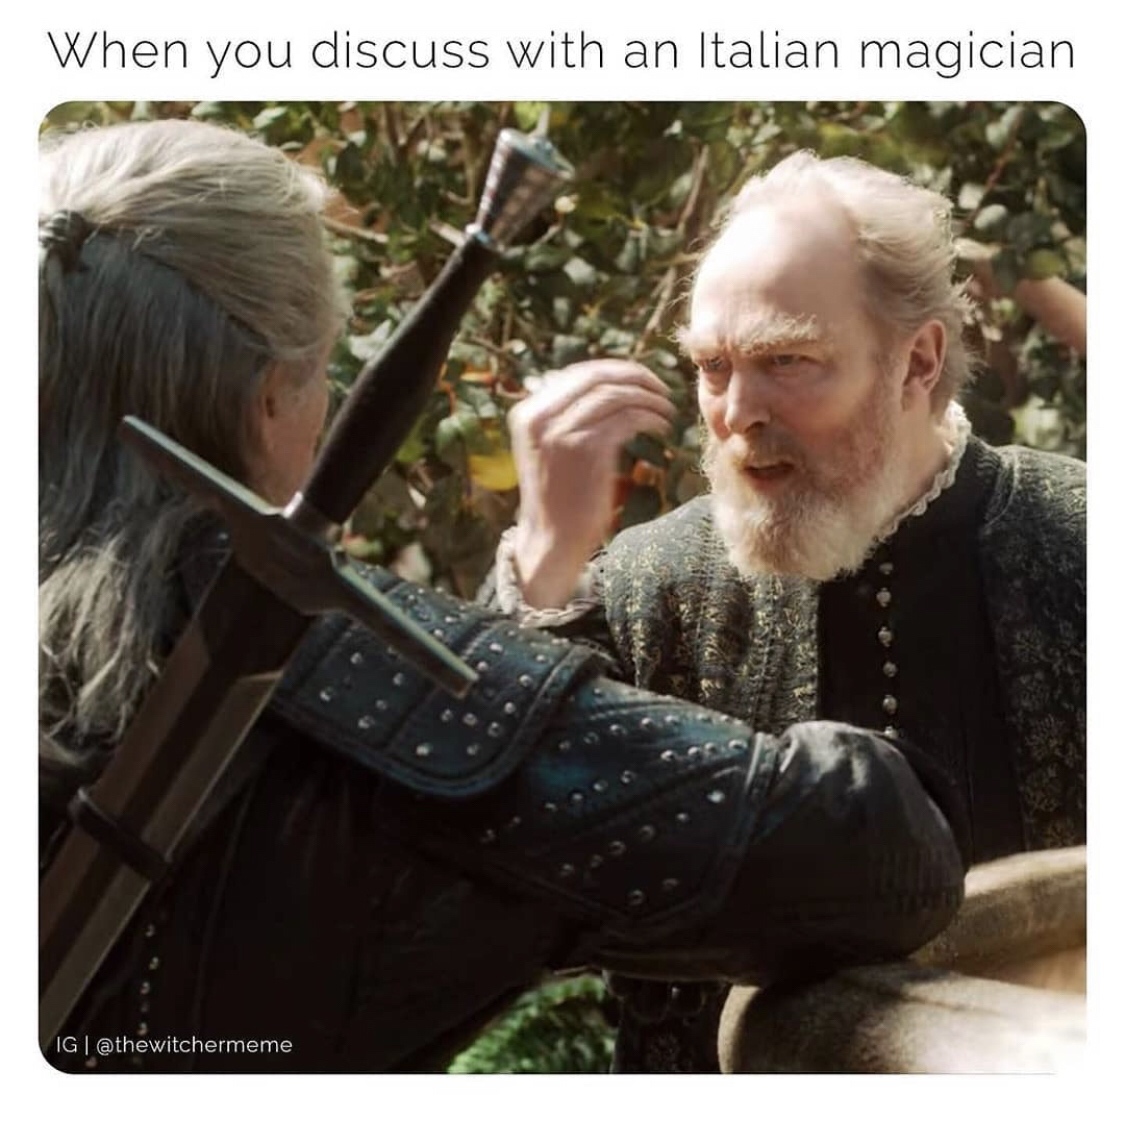 photo caption - When you discuss with an Italian magician Ig